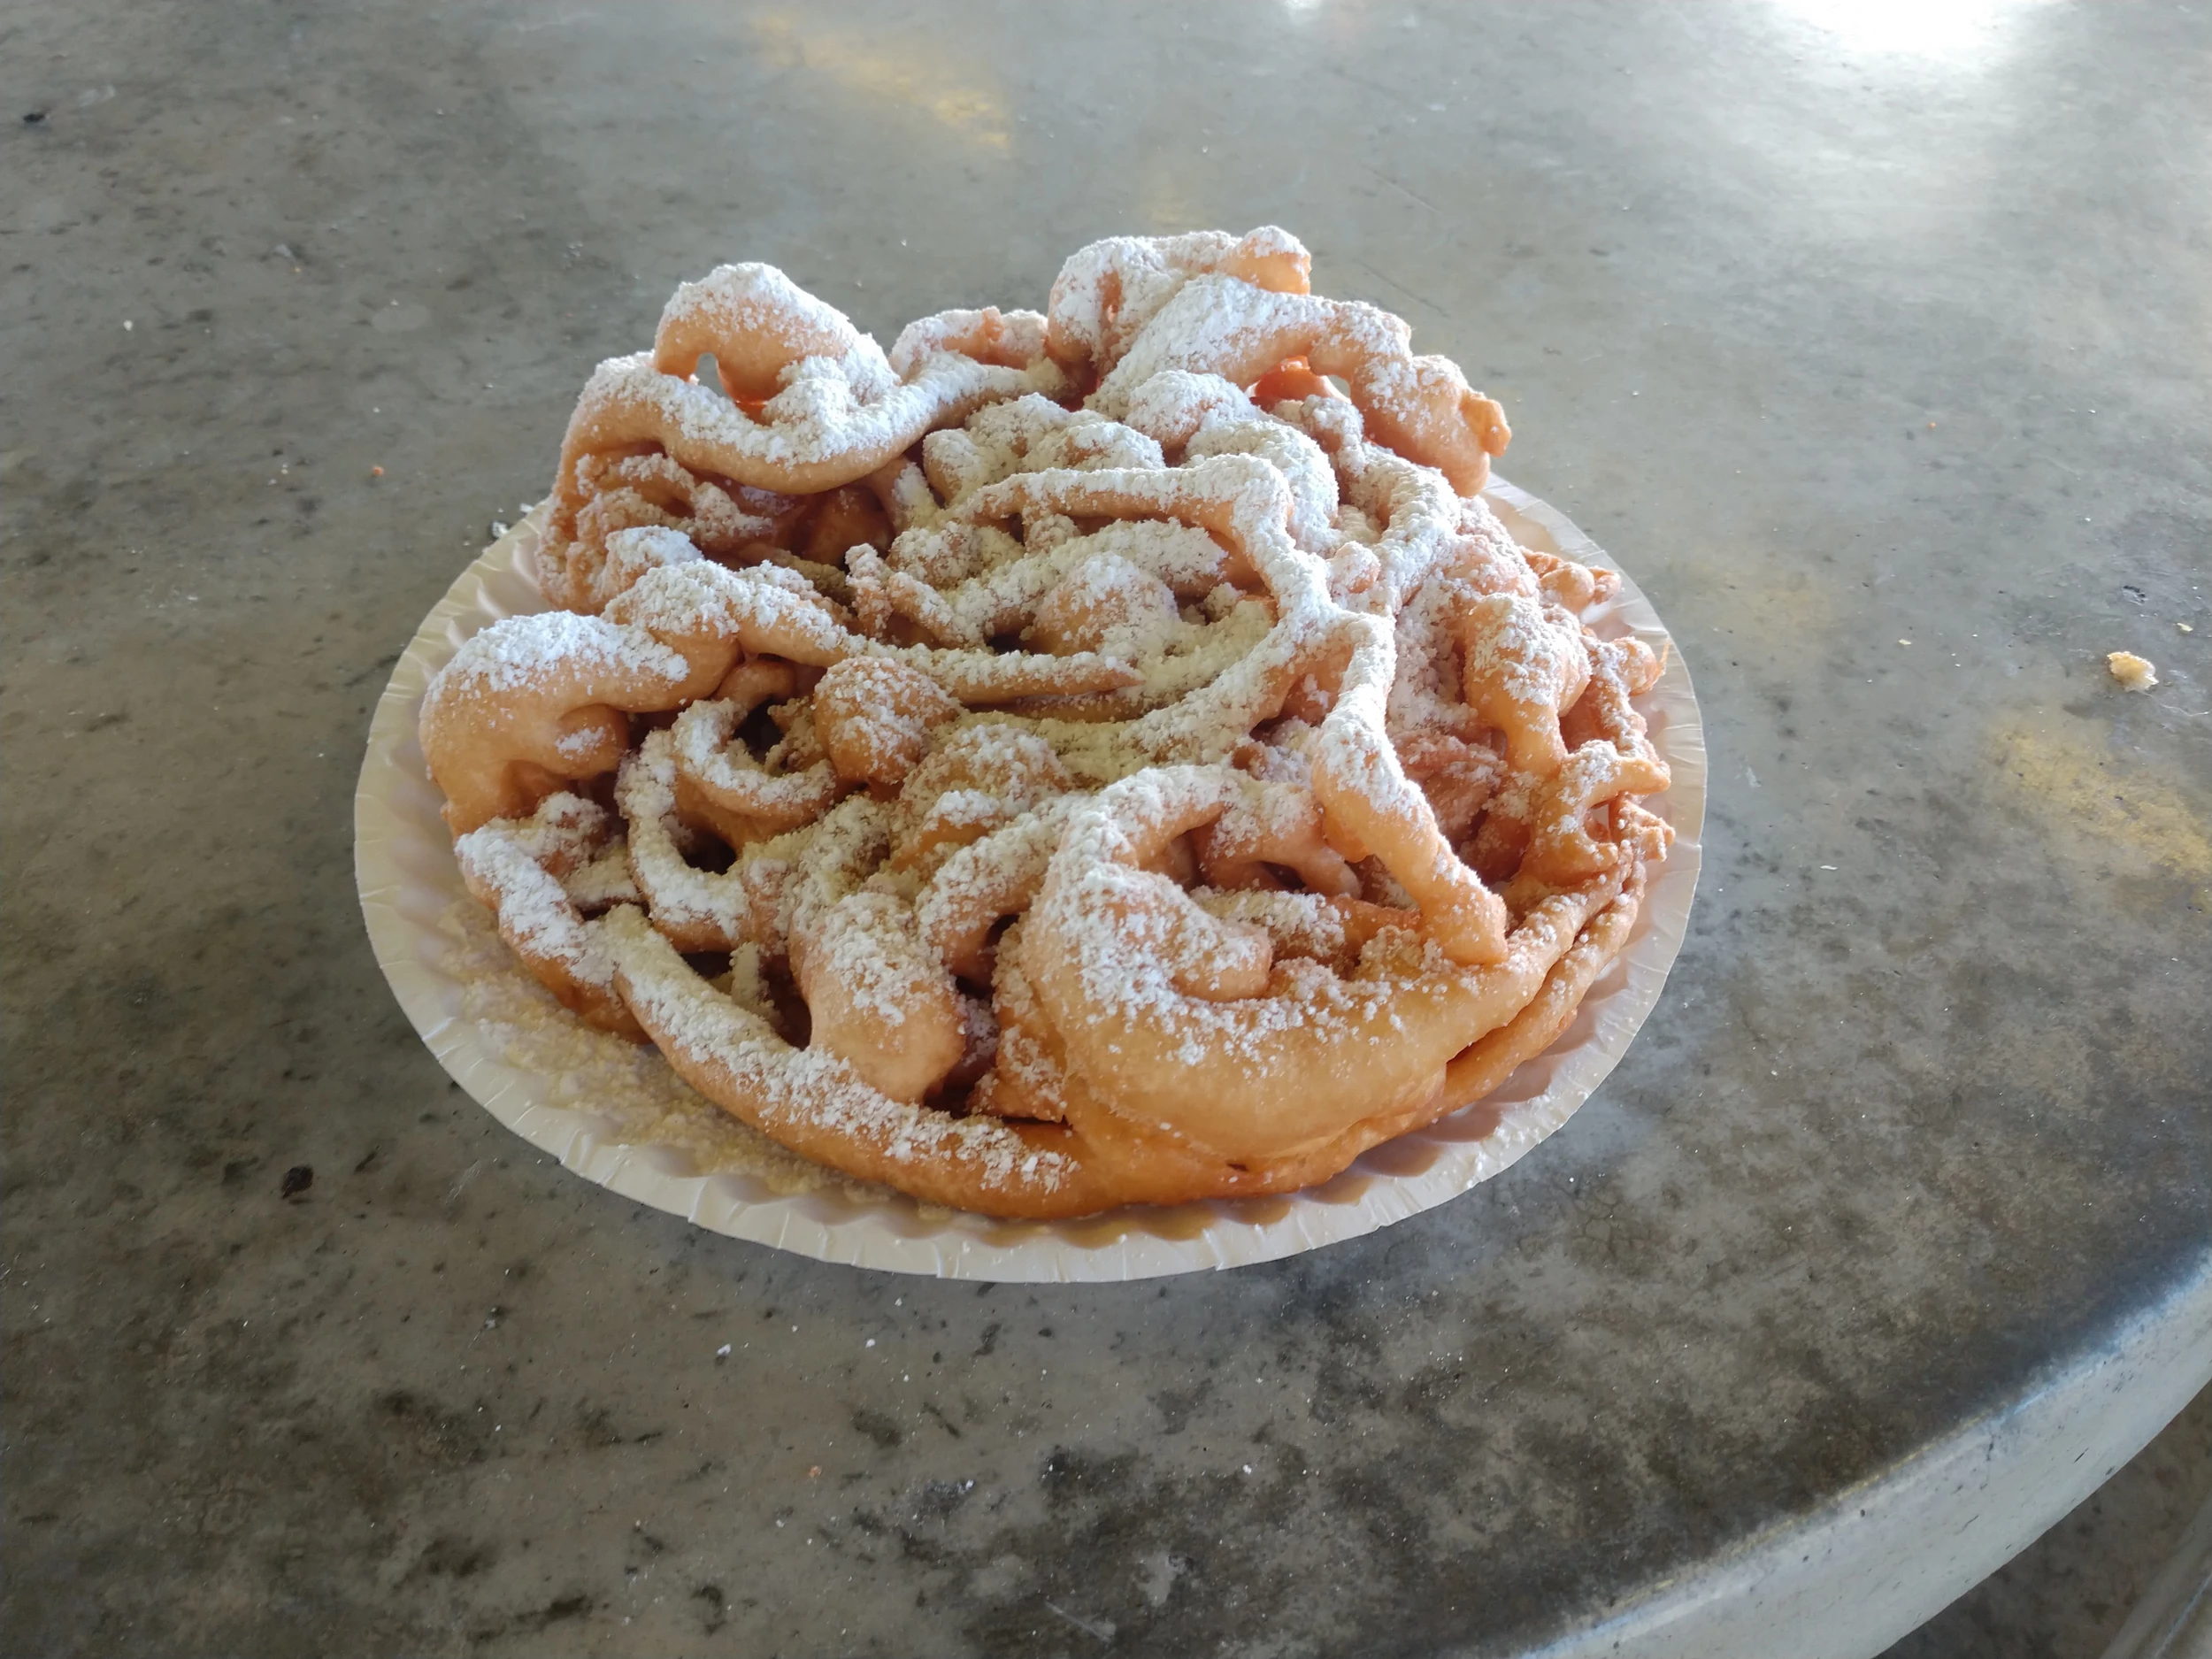 Great America unveils recipe for its beloved funnel cakes